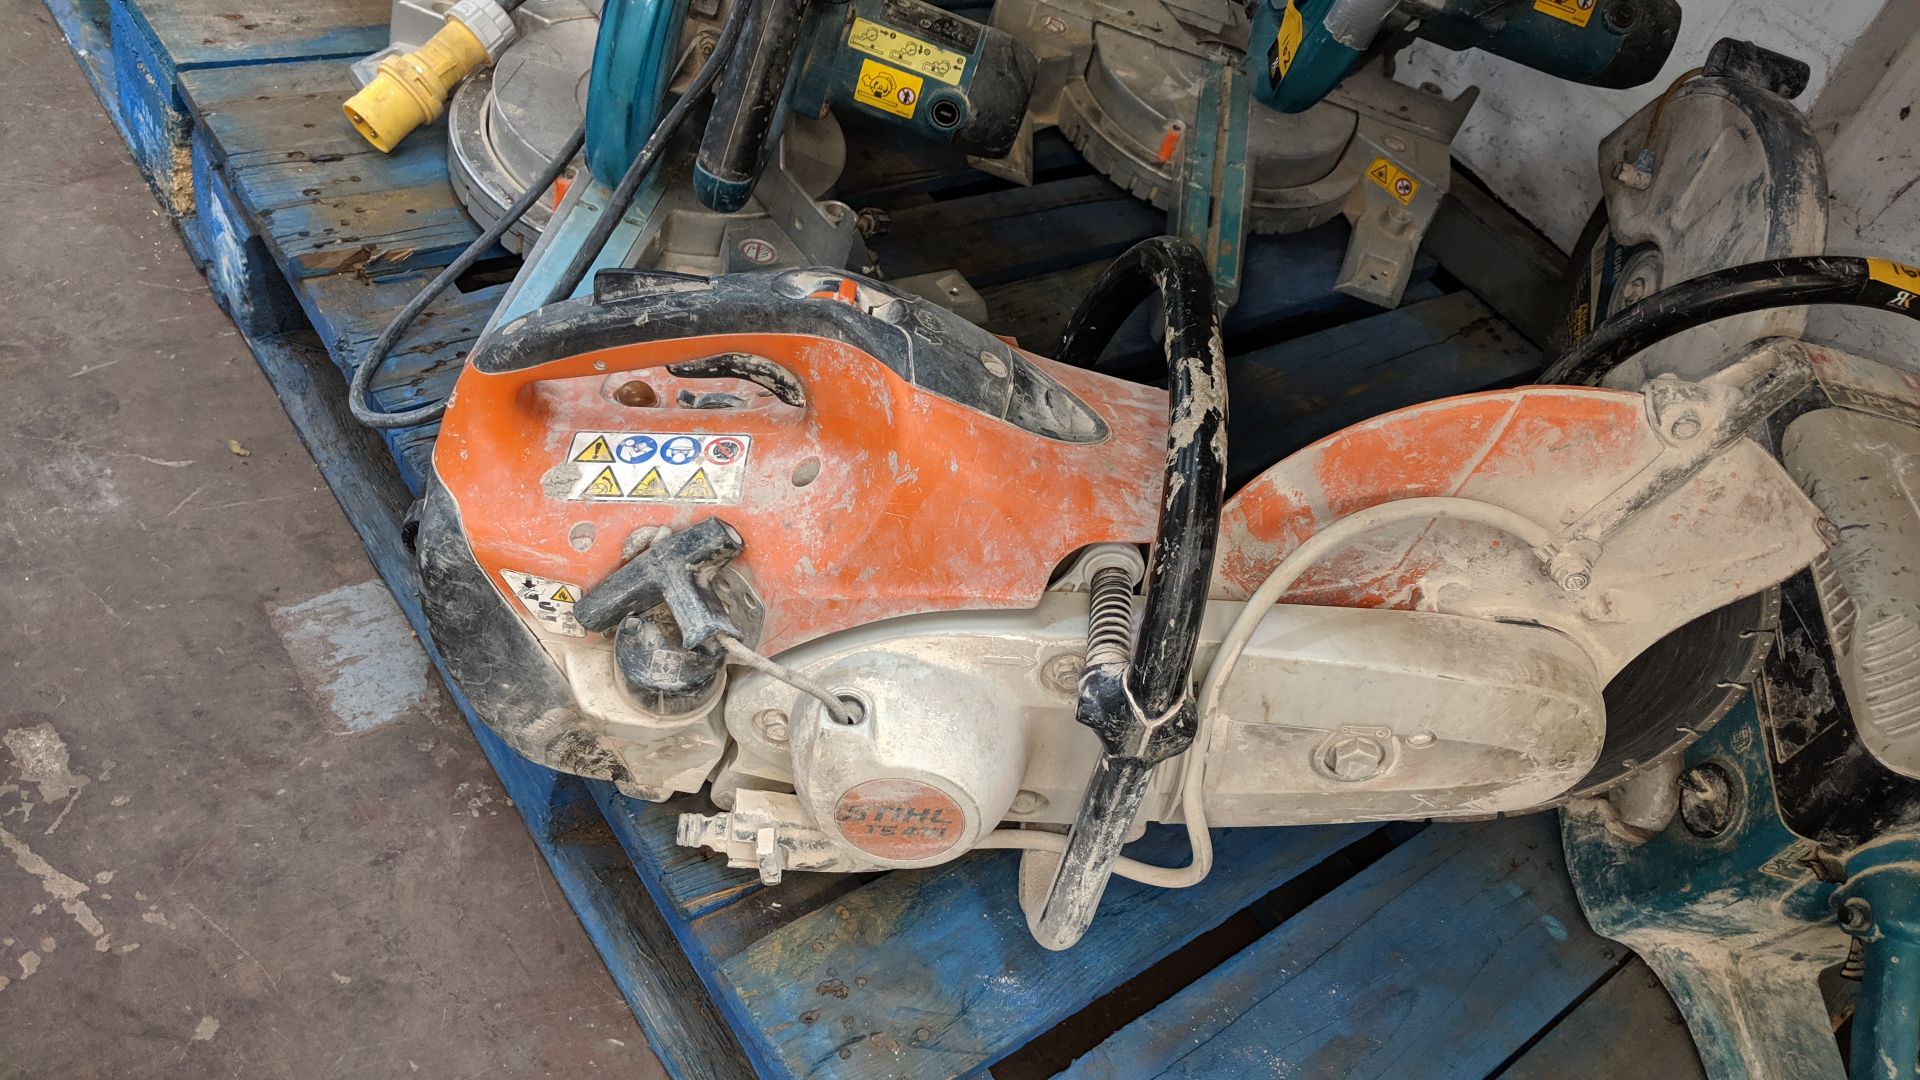 Stihl model TS410 petrol saw IMPORTANT: Please remember goods successfully bid upon must be paid for - Image 3 of 3